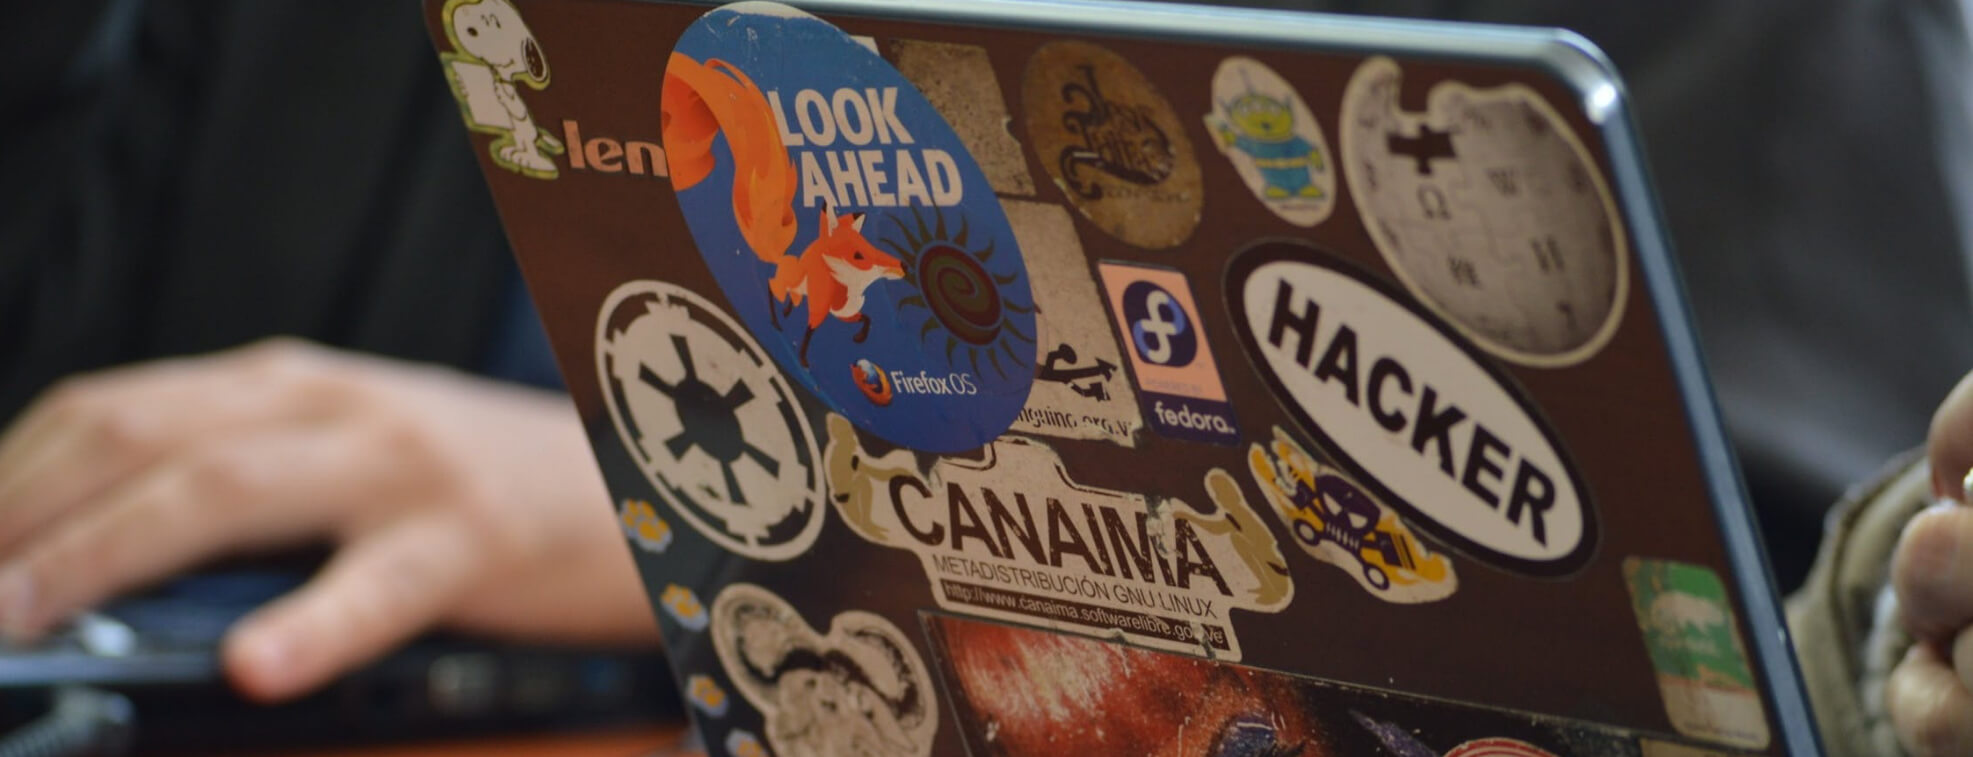 Laptop covered with stickers